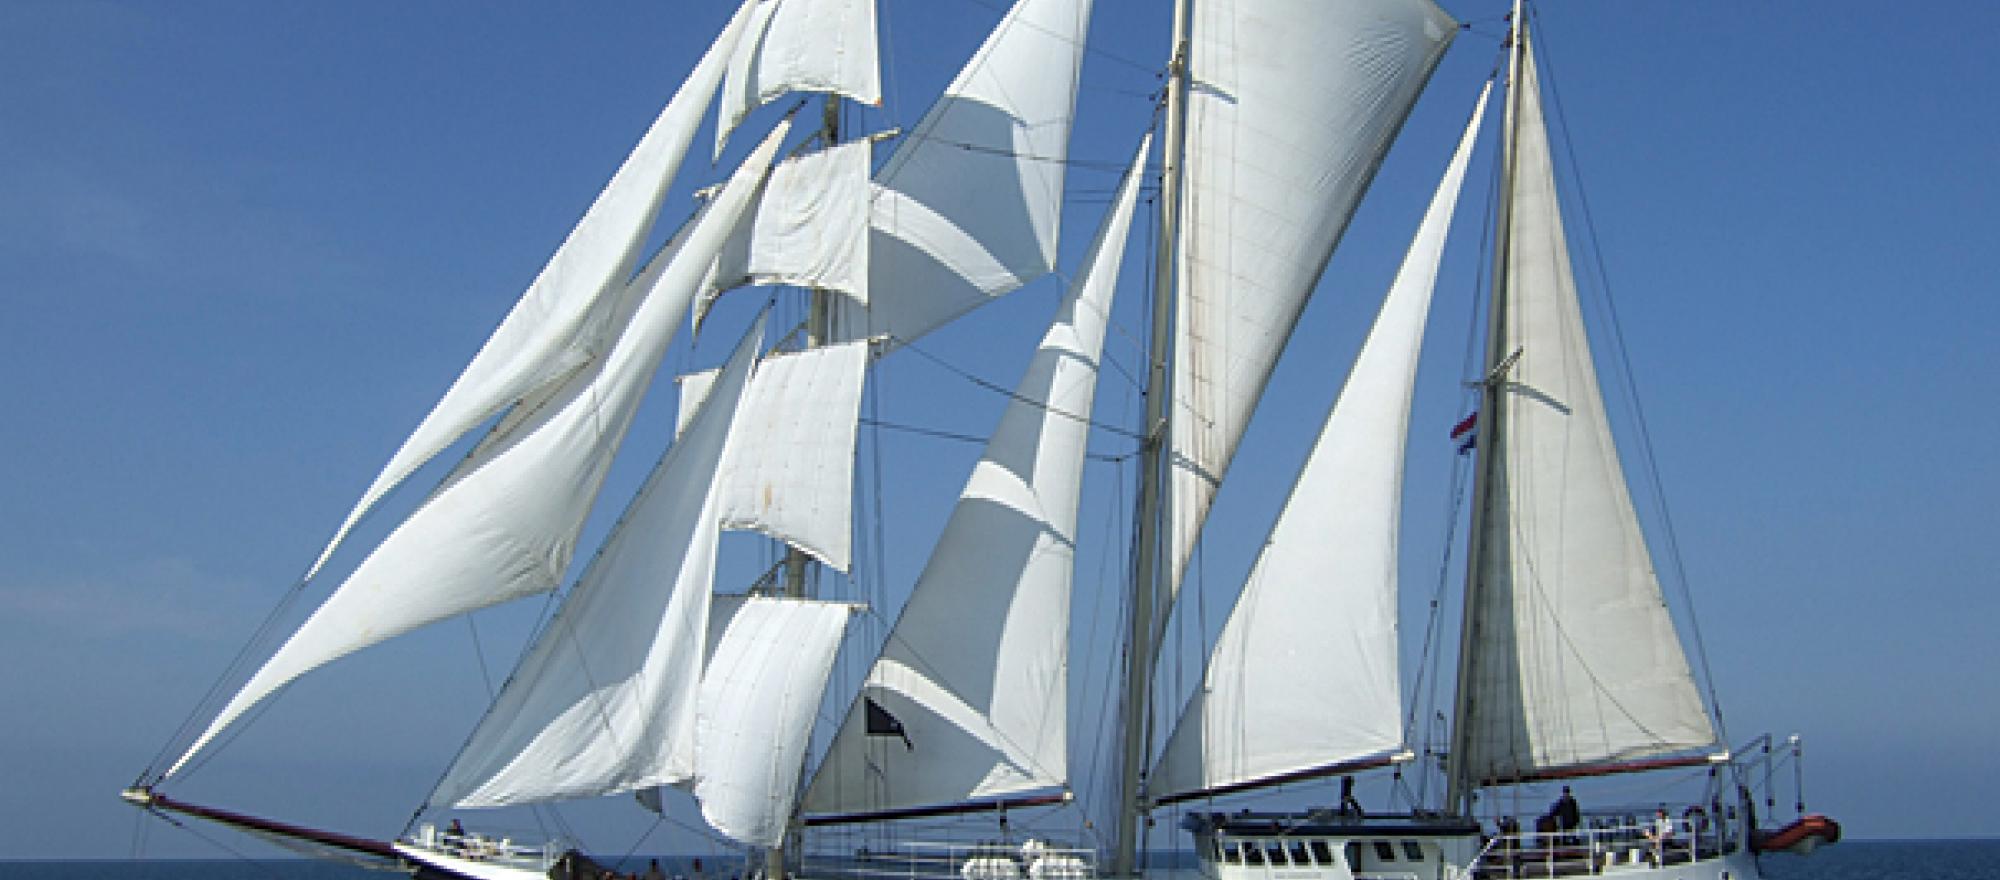 Kieler Woche is the world’s largest sailing event and the largest annual fest